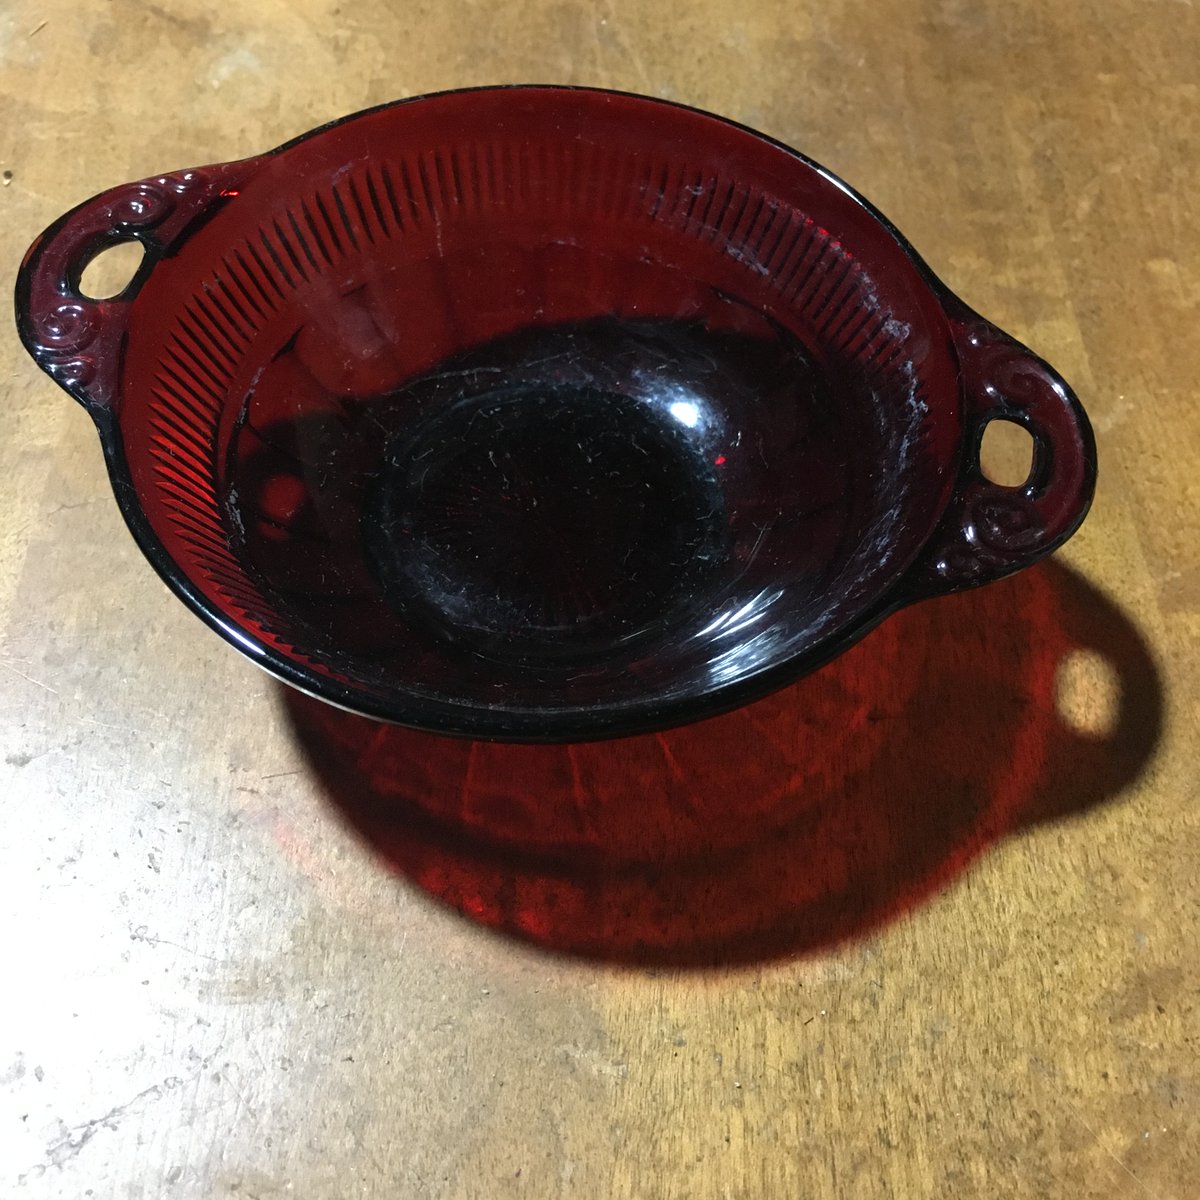 This little ruby red trinket dish is one piece I've been able to date: 1940s dessert dish, Anchor Hocking Co, Coronation pattern.